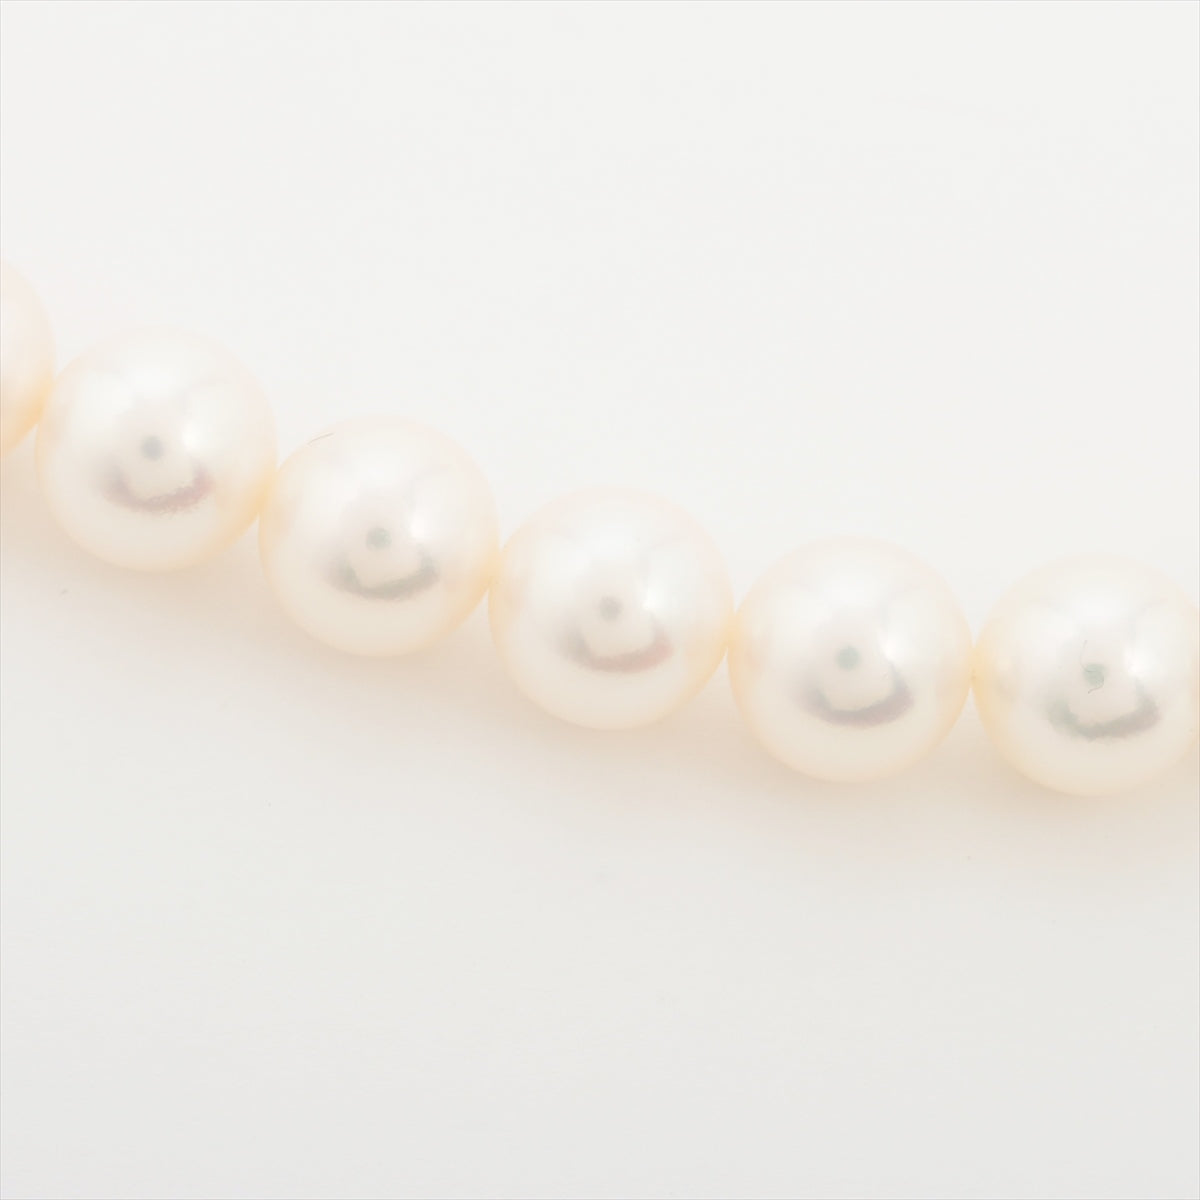 Mikimoto Pearl Necklace K14(YG) Total 64.6g Approx. 7.5mm-8.0mm